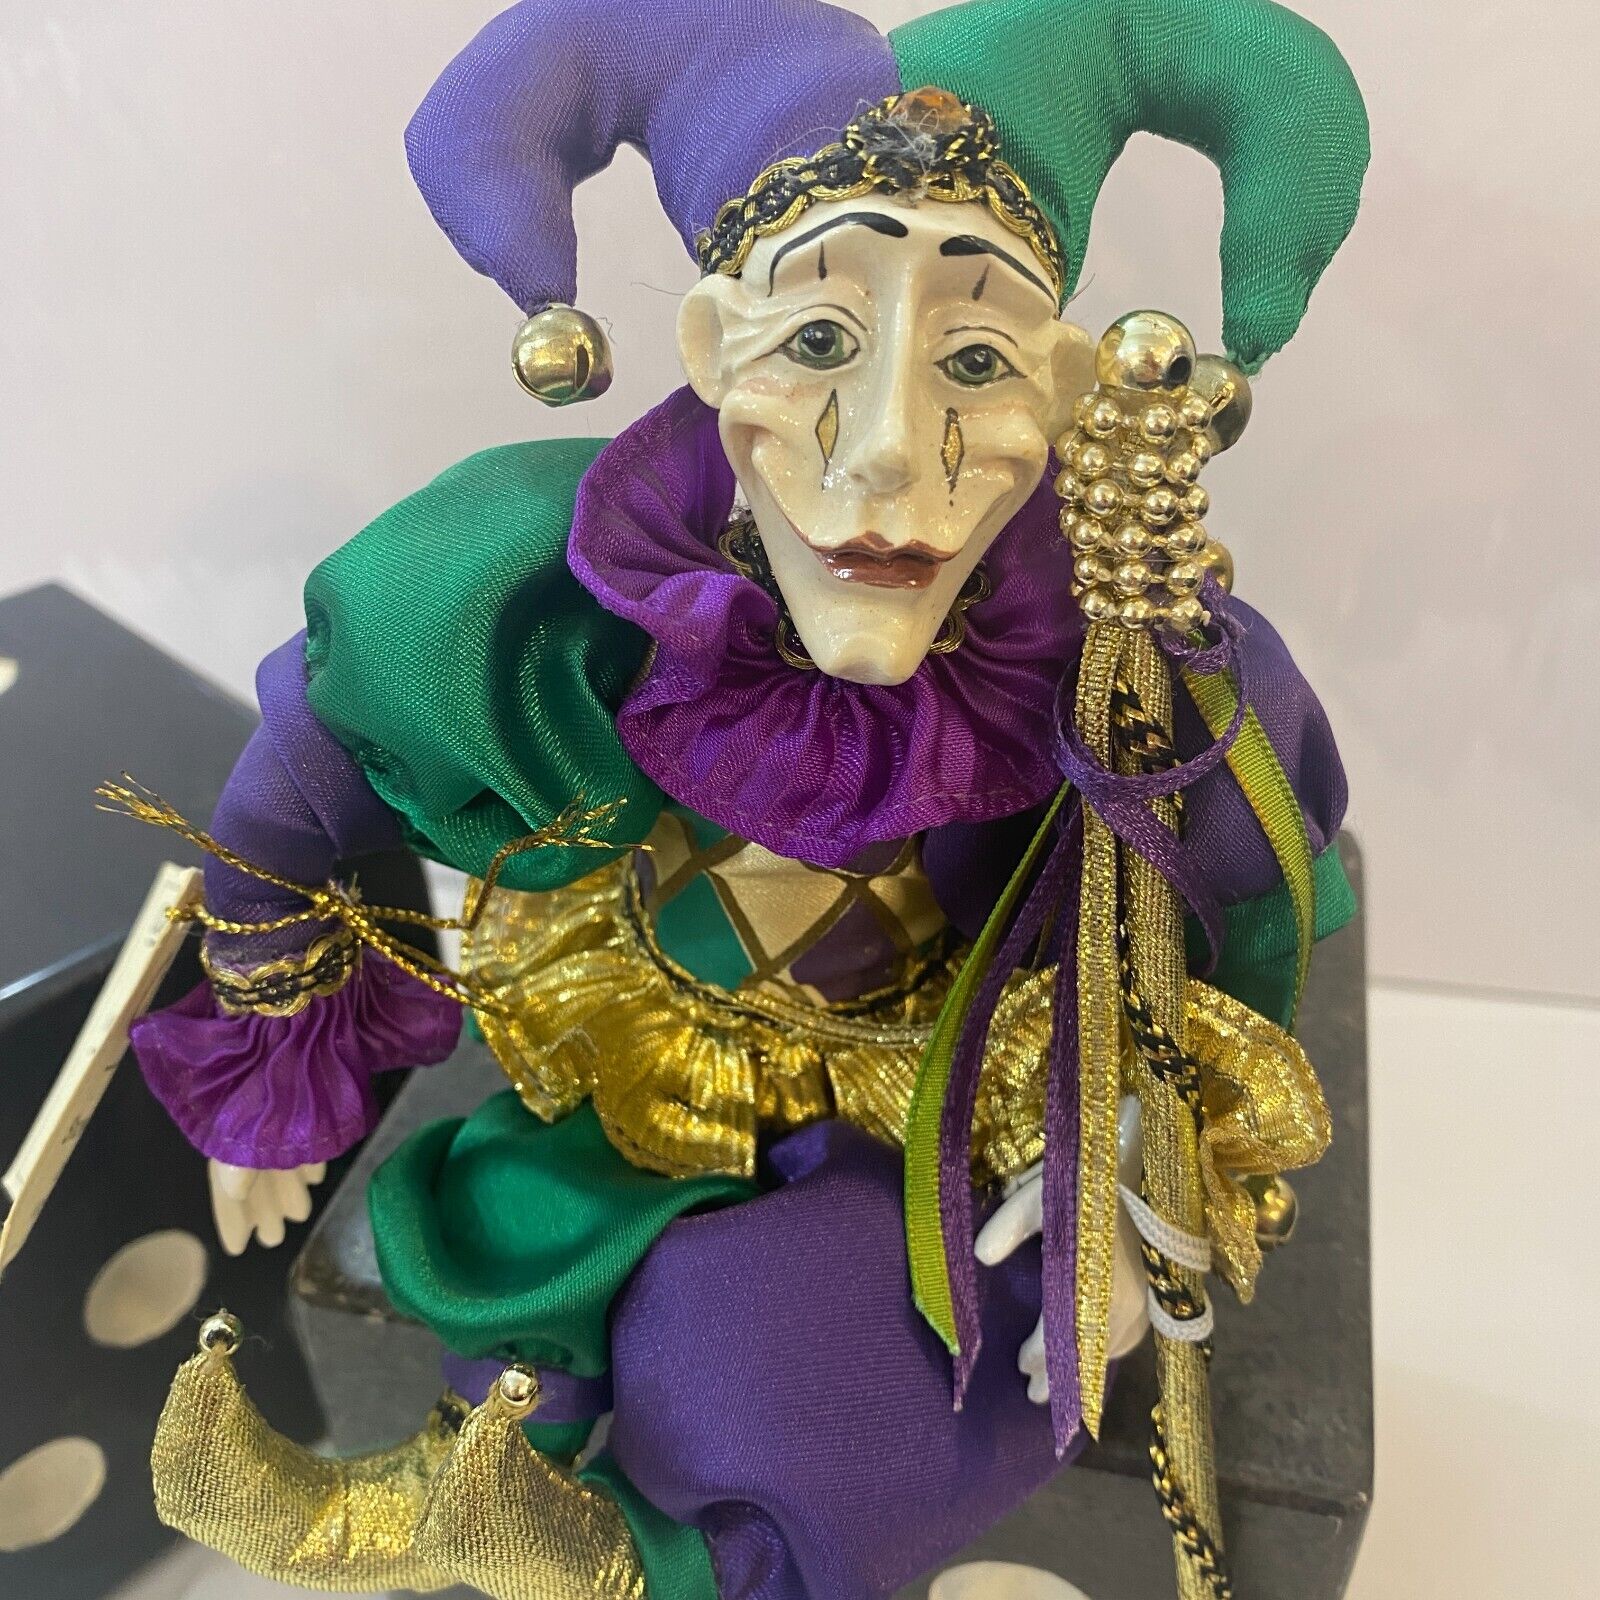 Mardi Gras Court Jester, Checkers, Porcelain Clown Doll, from The Orleans, Rare